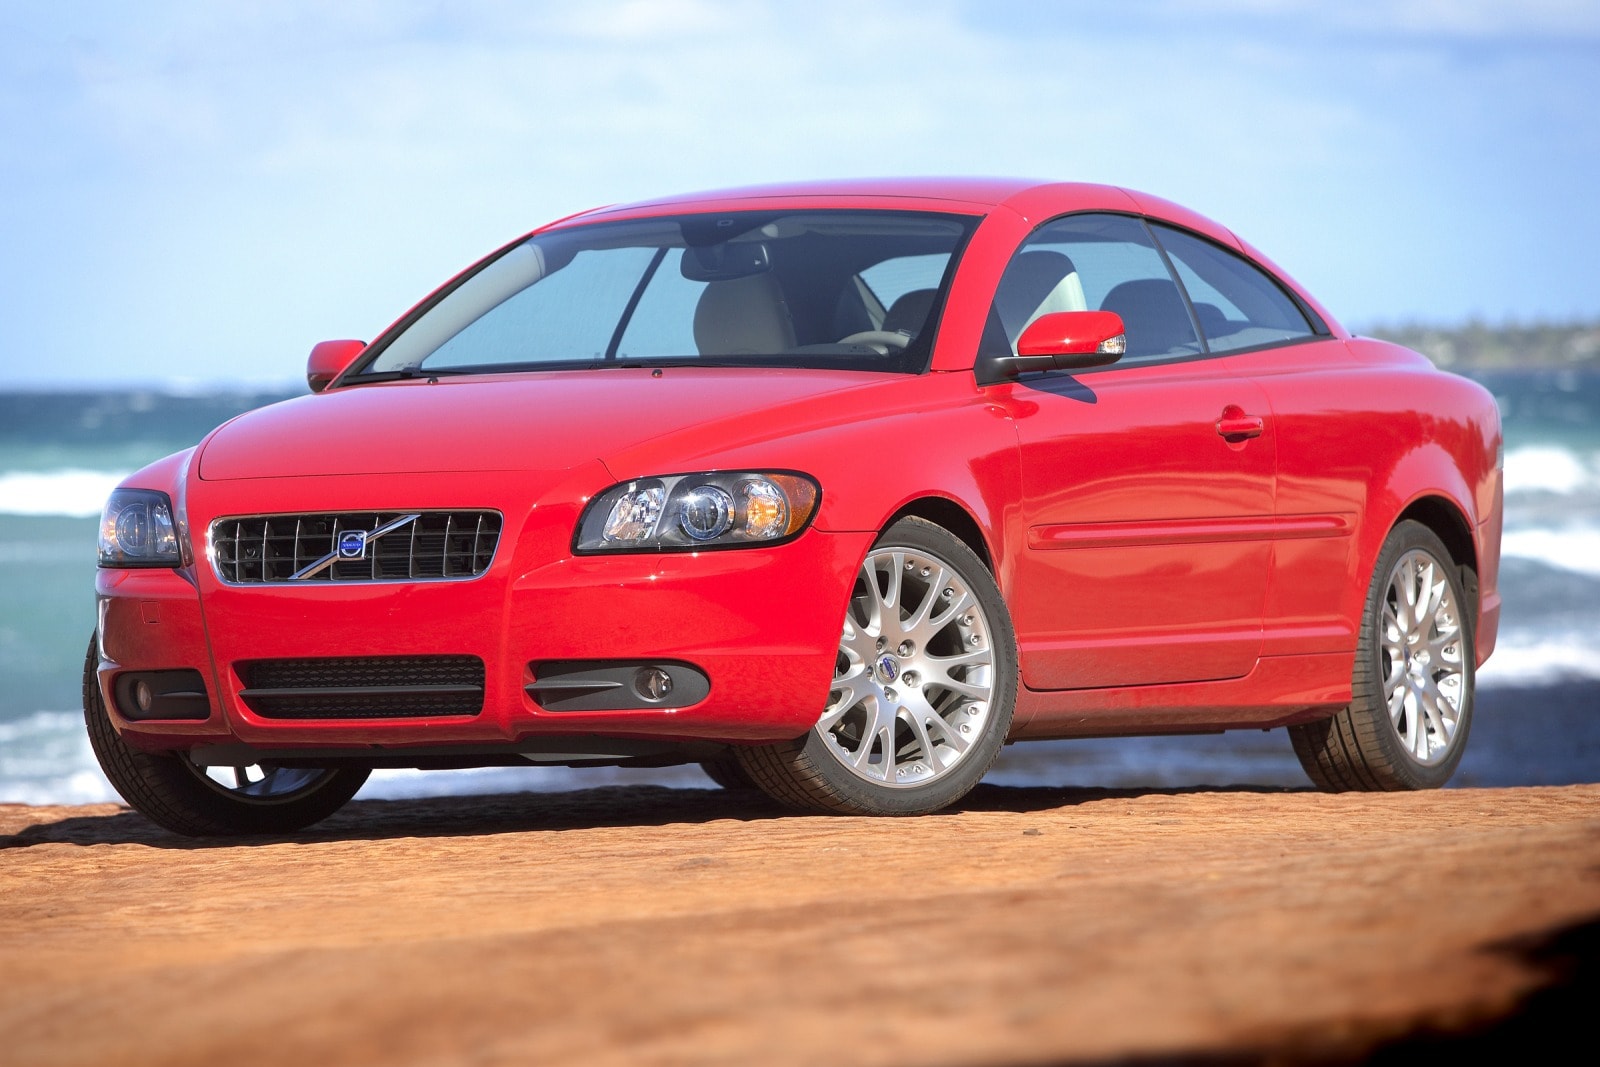 2009 Volvo C70 Review & Ratings | Edmunds